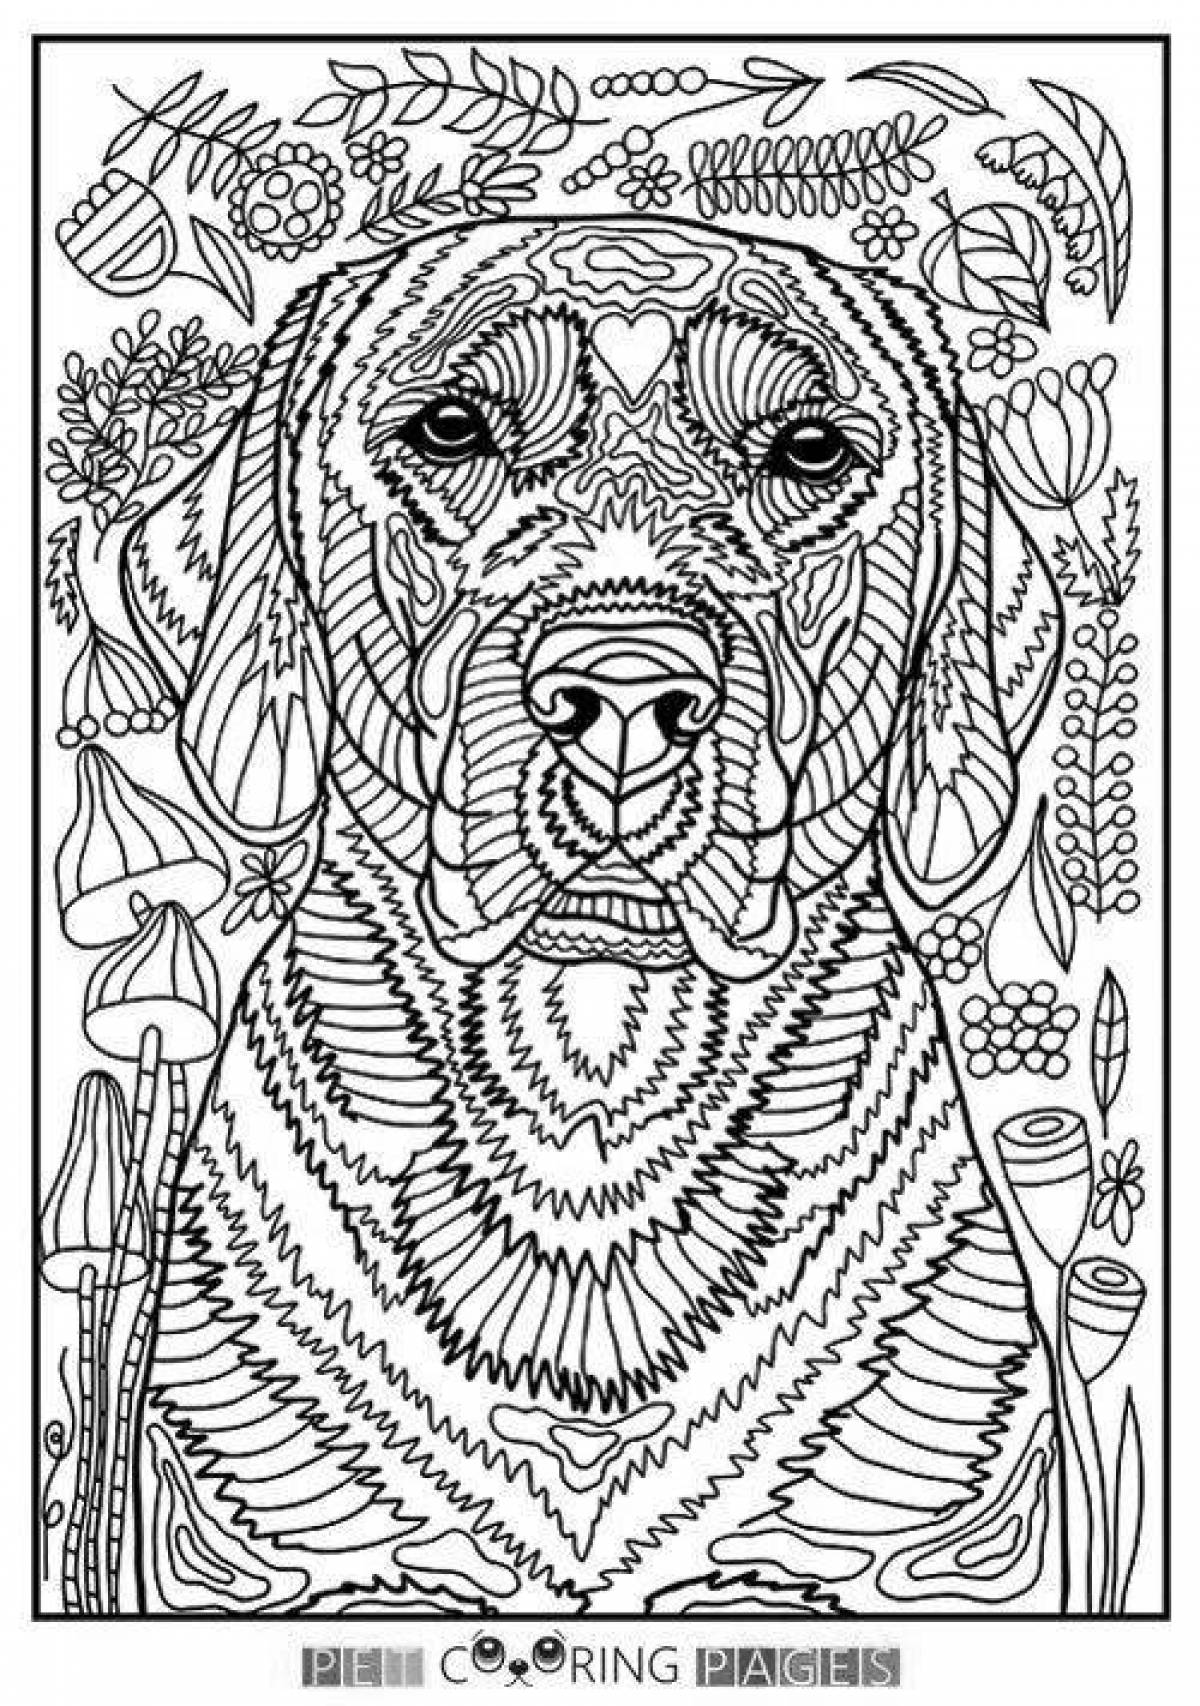 Humorous dog coloring by numbers